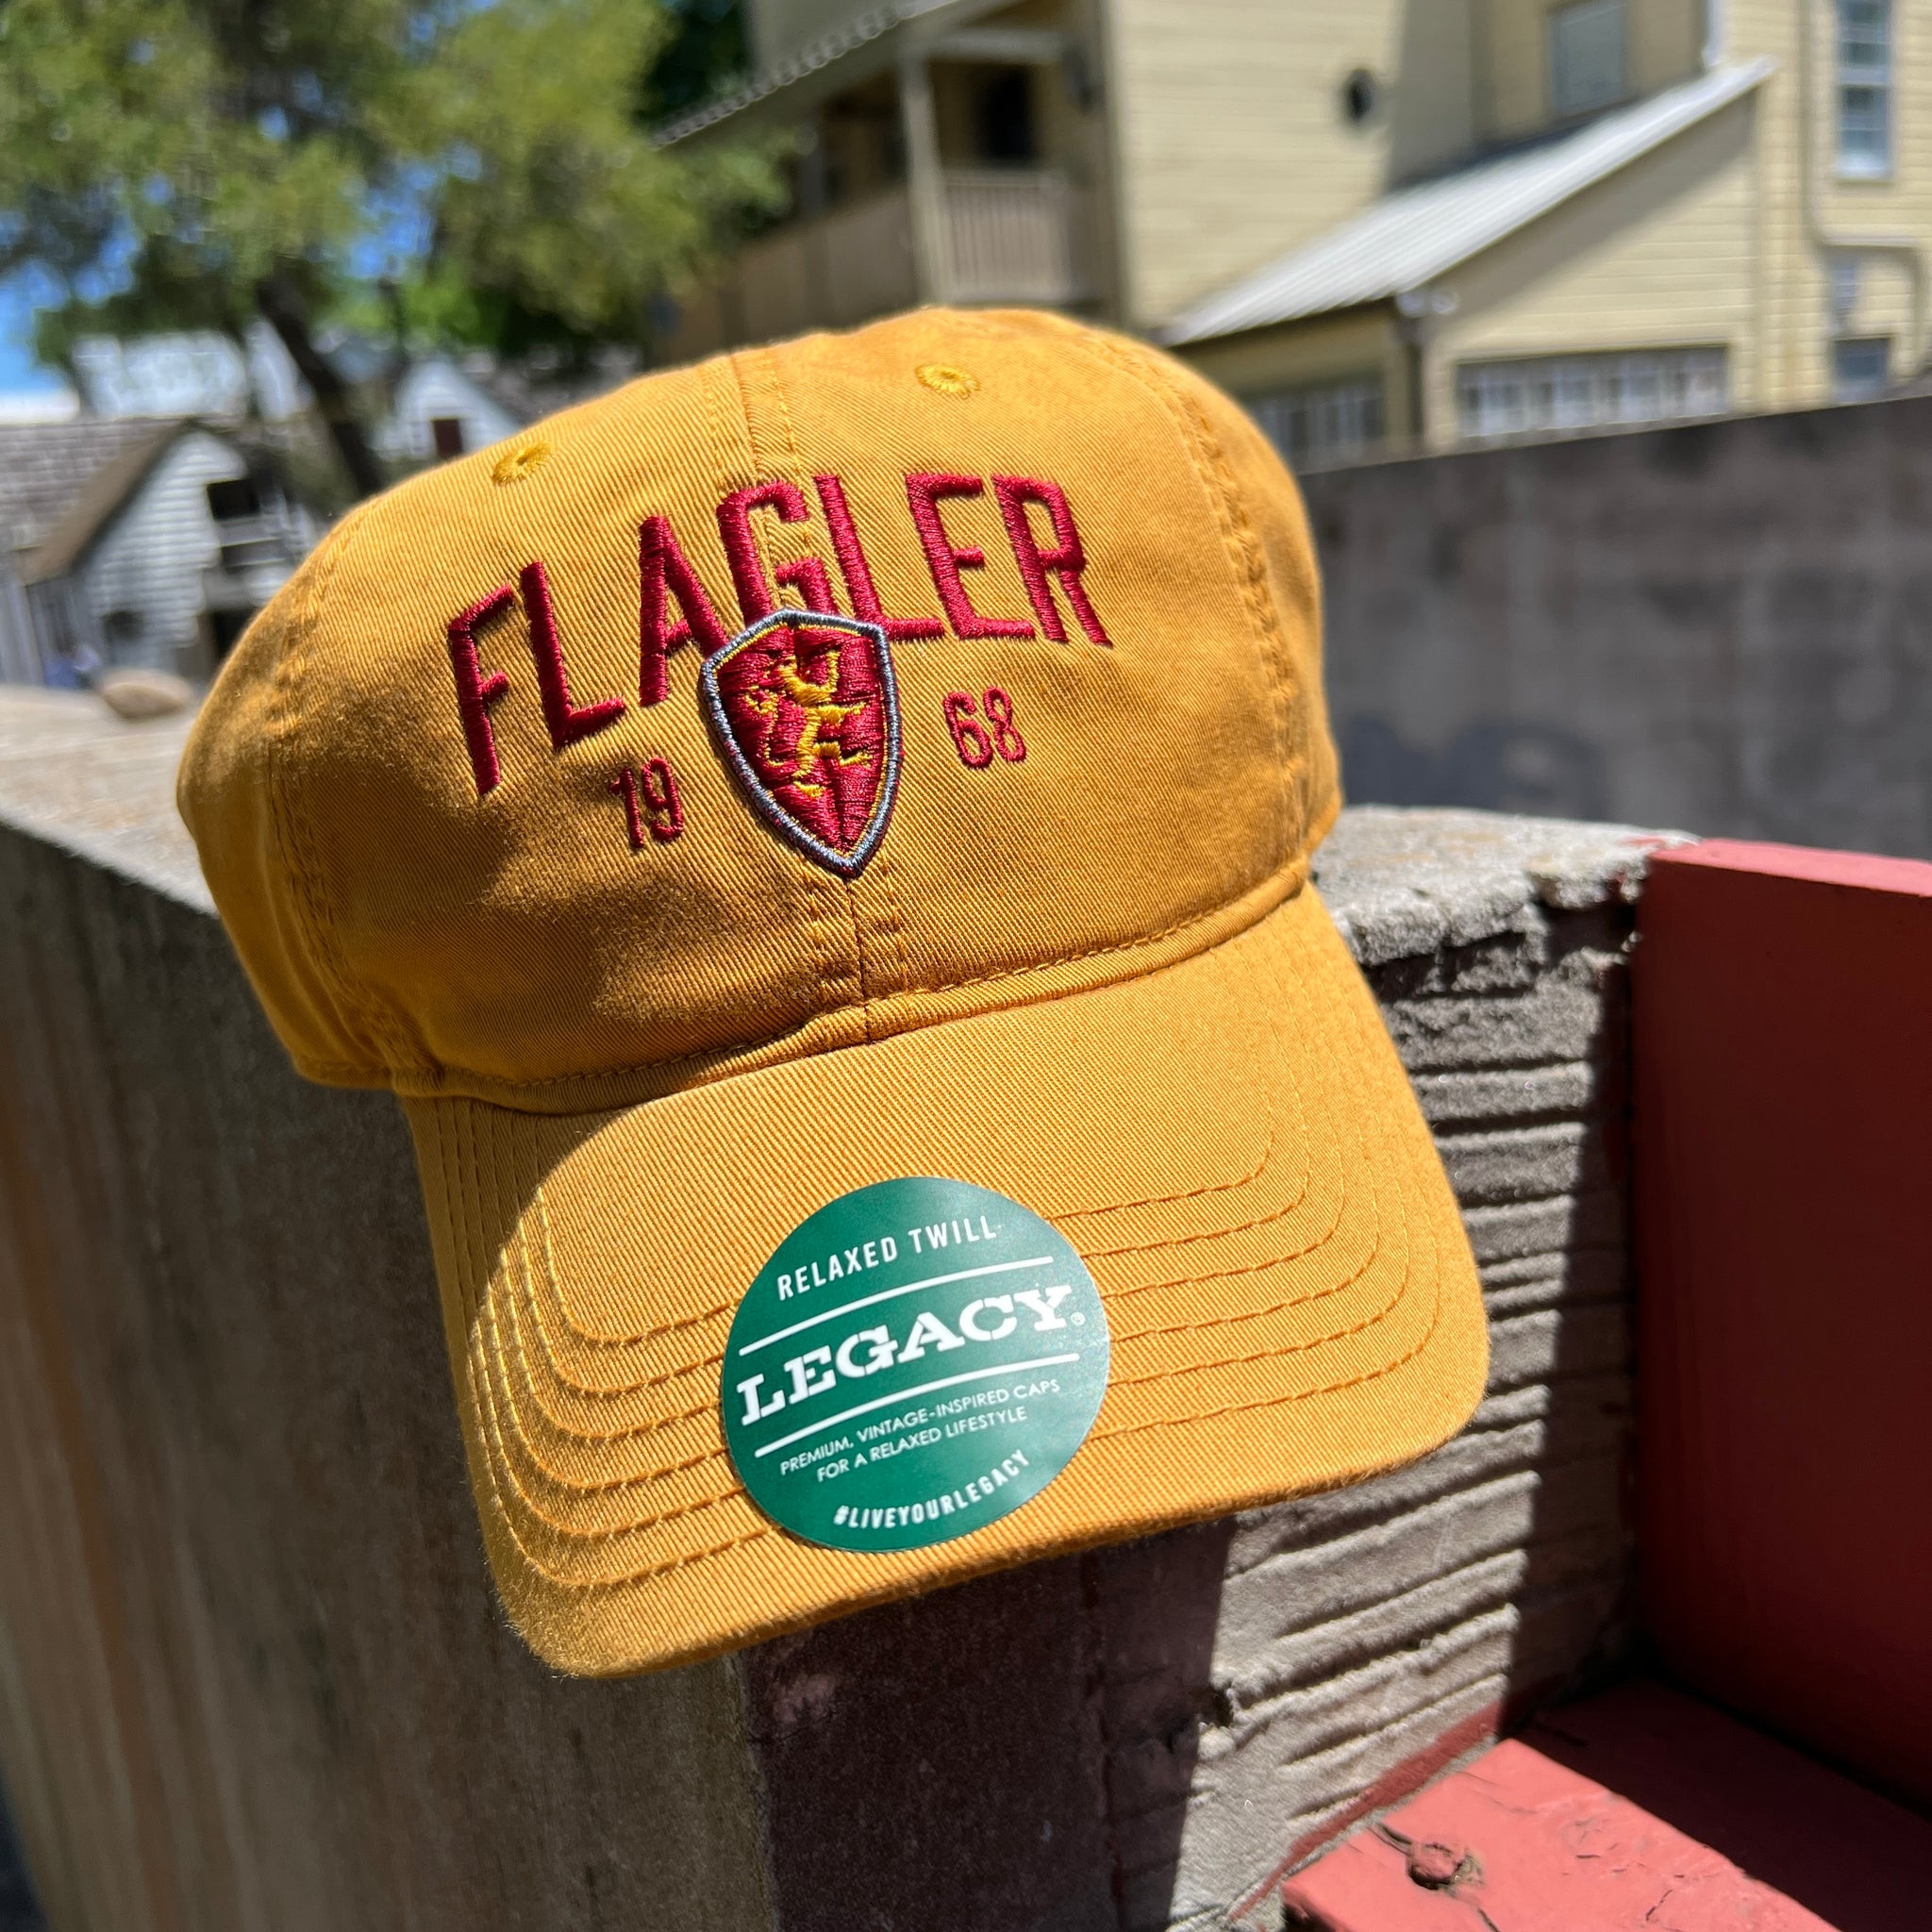 Gold Flagler 1968 Relaxed Twill Hat